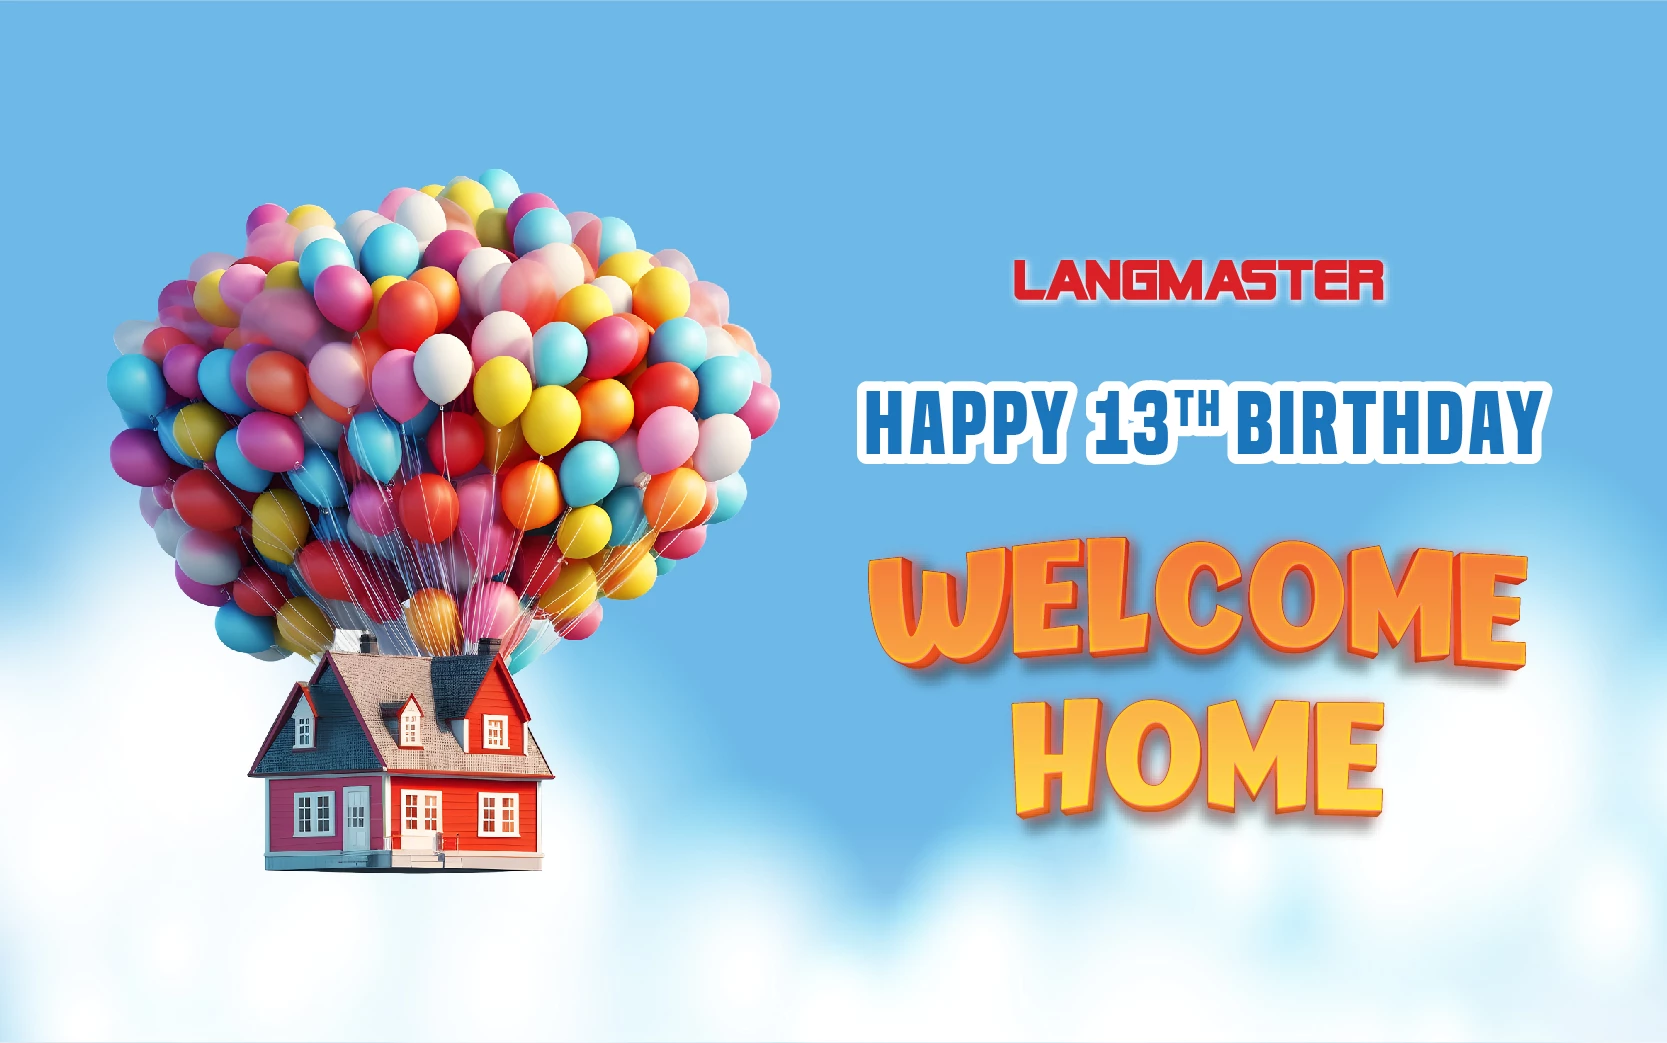 LANGMASTER HAPPY 13TH BIRTHDAY: WELCOME HOME